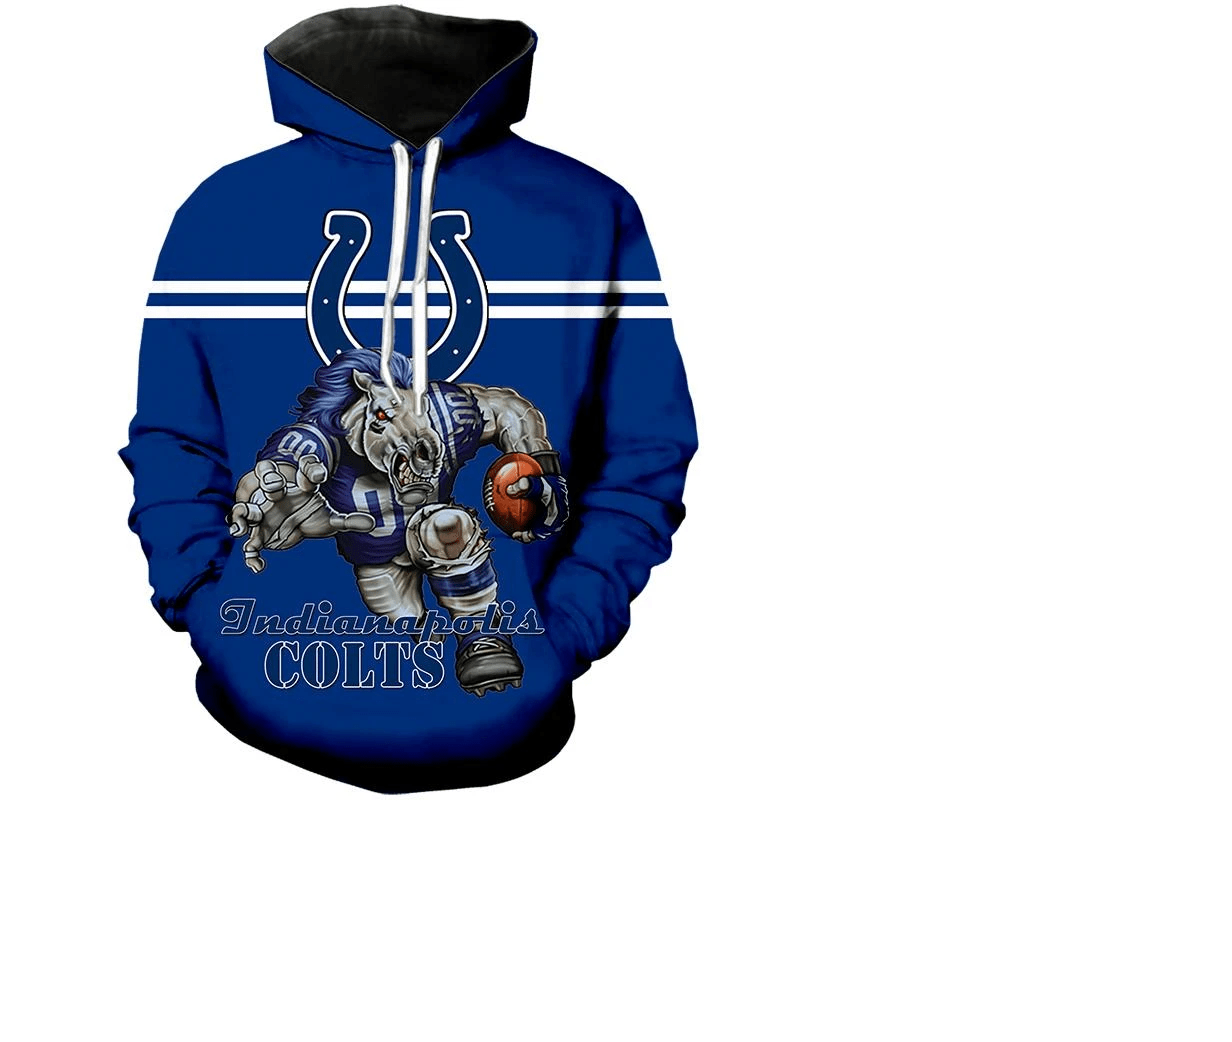 Indianapolis Colts hoodie Ultra-cool design Sweatshirt Pullover NFL